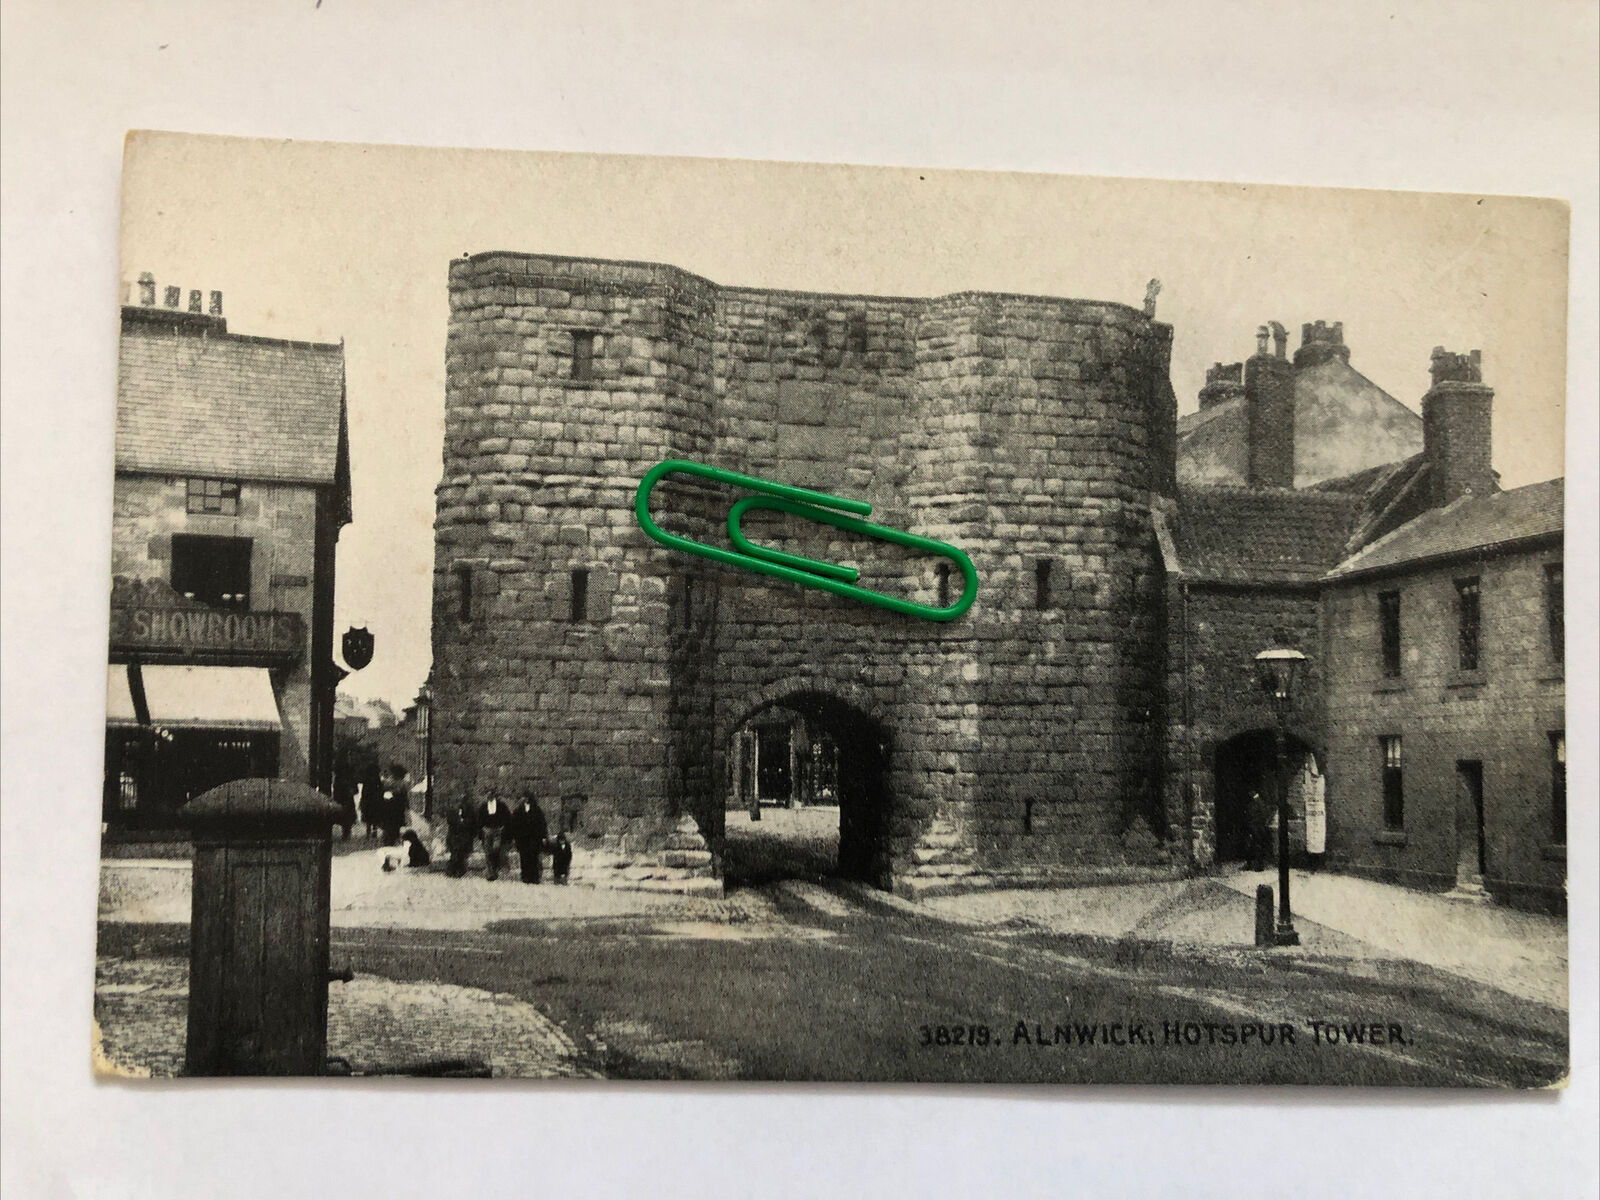 House Clearance - Alnwick Hotspur Tower Northumberland Early 1900’s